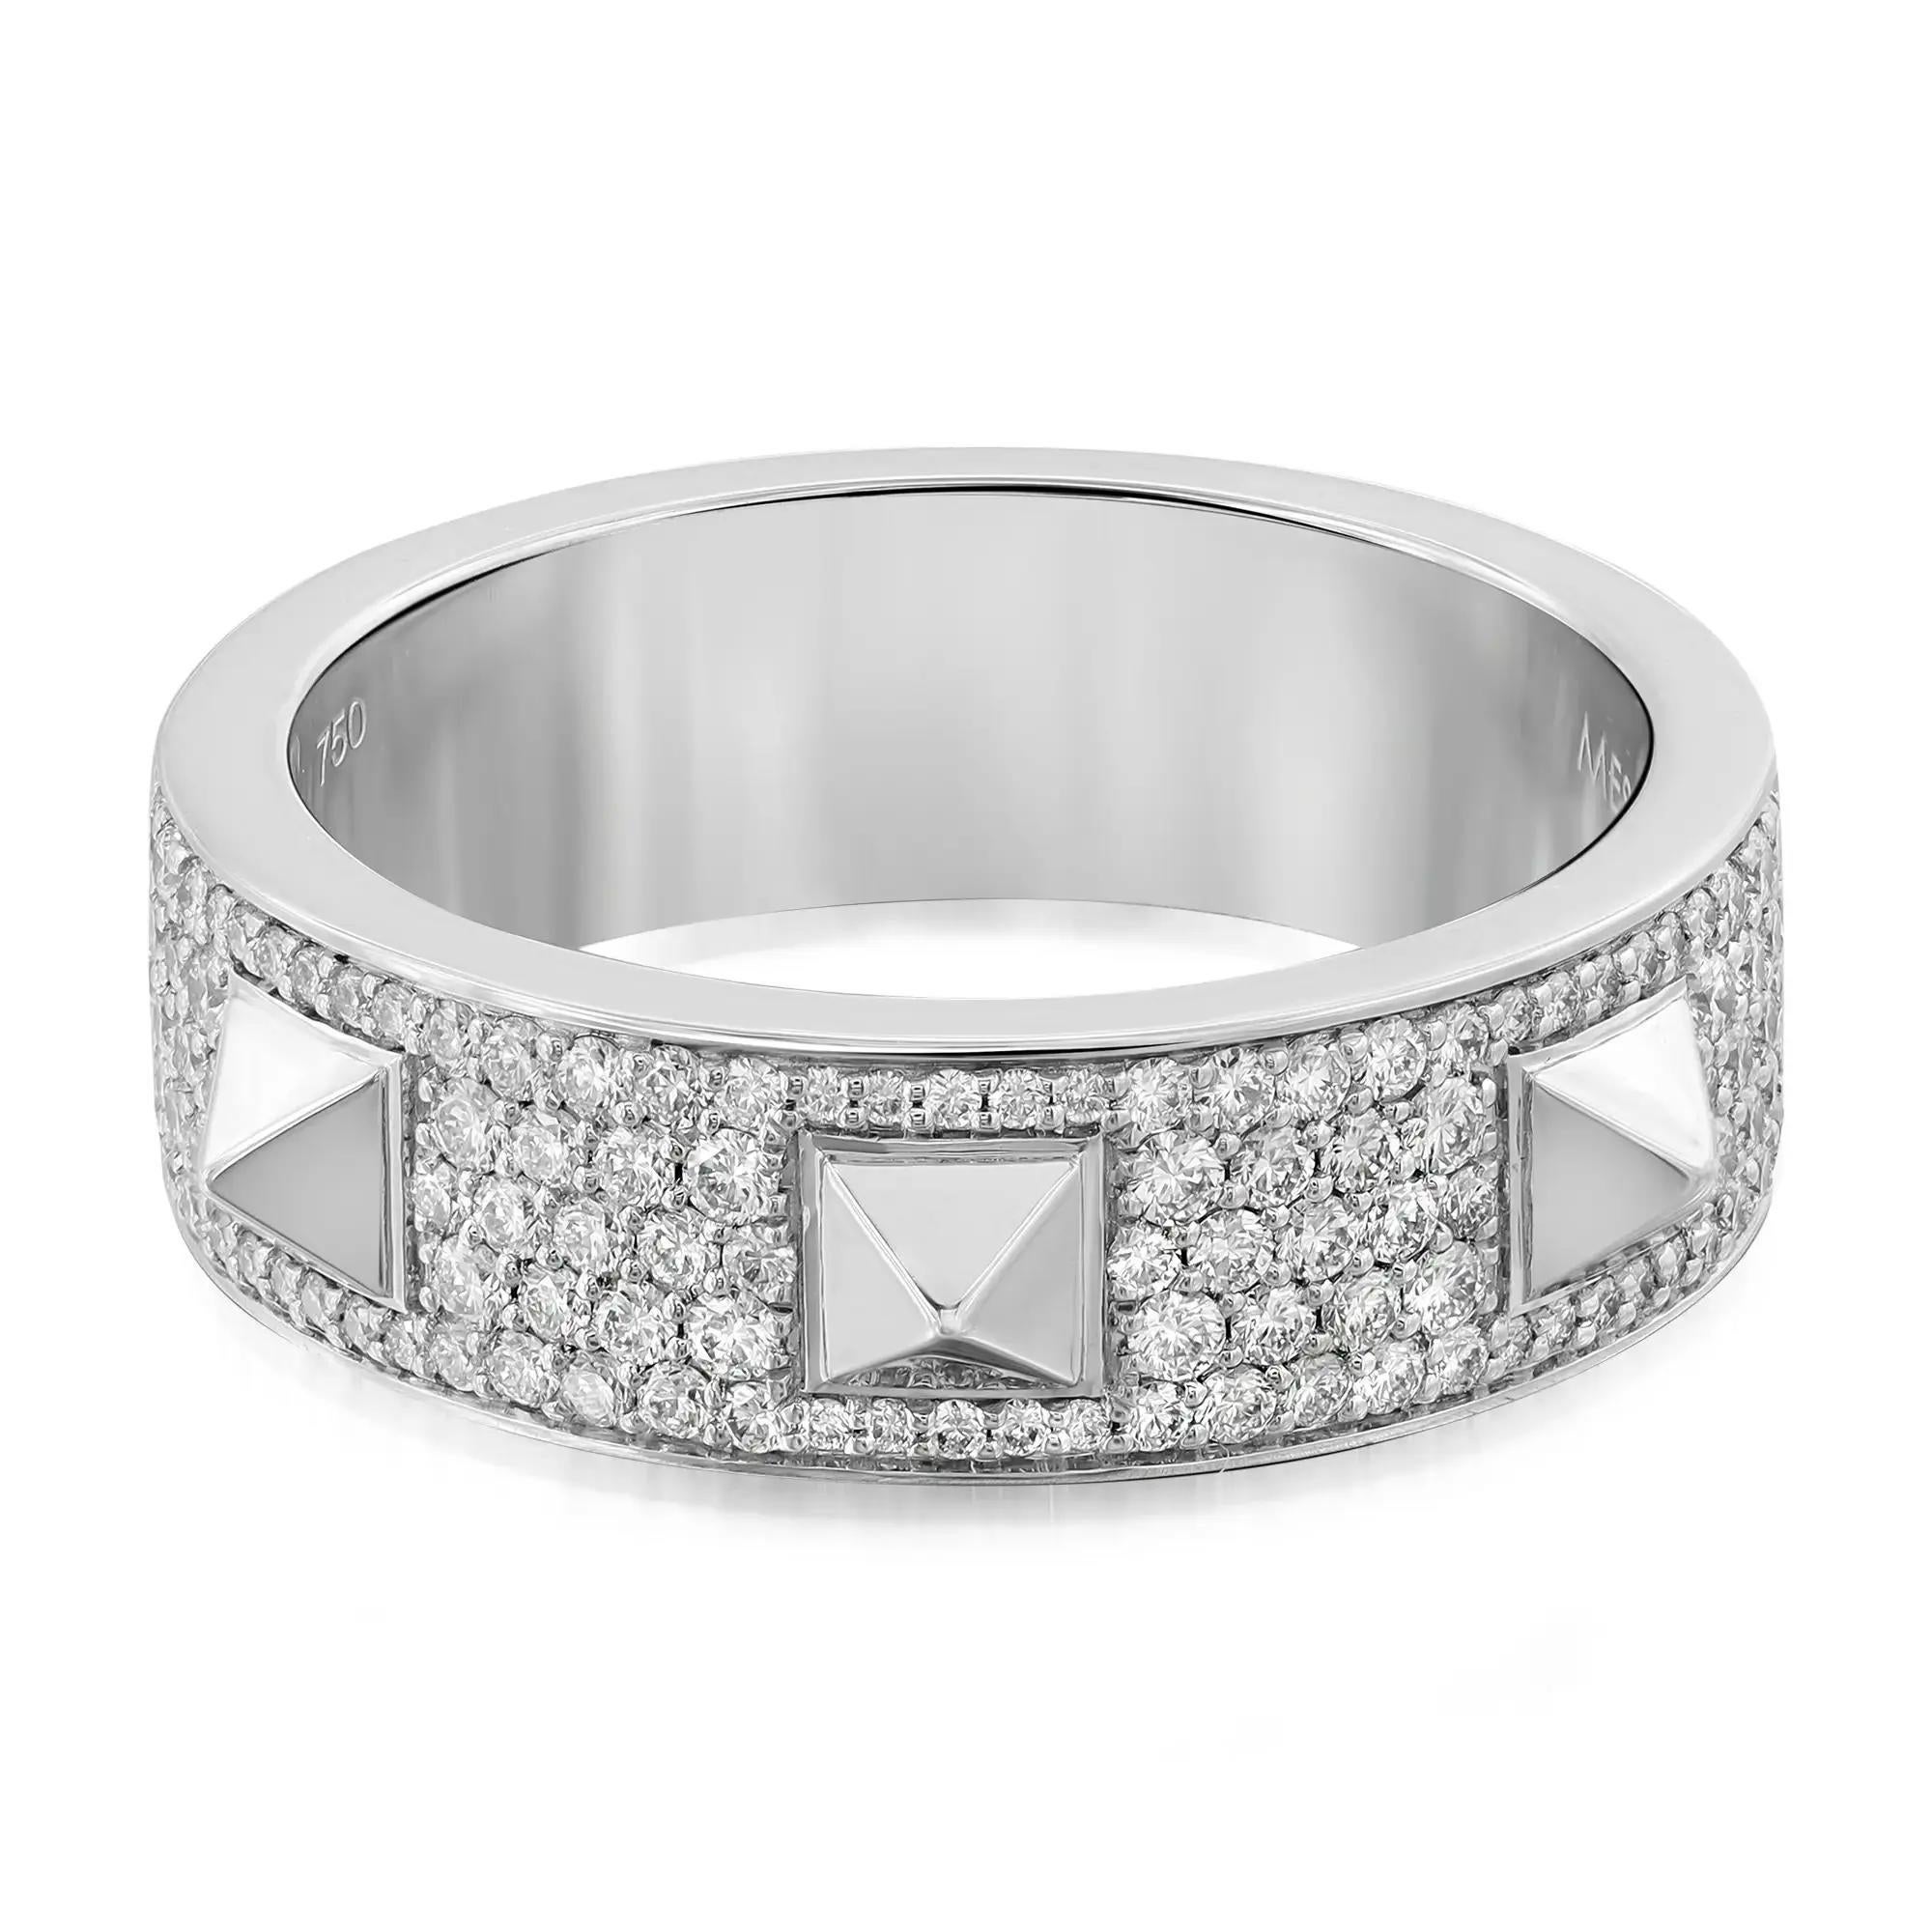 Bold and contemporary, Messika Spiky diamond band ring. Crafted in lustrous 18K white gold. It features pave set round brilliant cut diamonds studded halfway through the band with three spikes giving it a unique look. Total diamond weight: 0.61